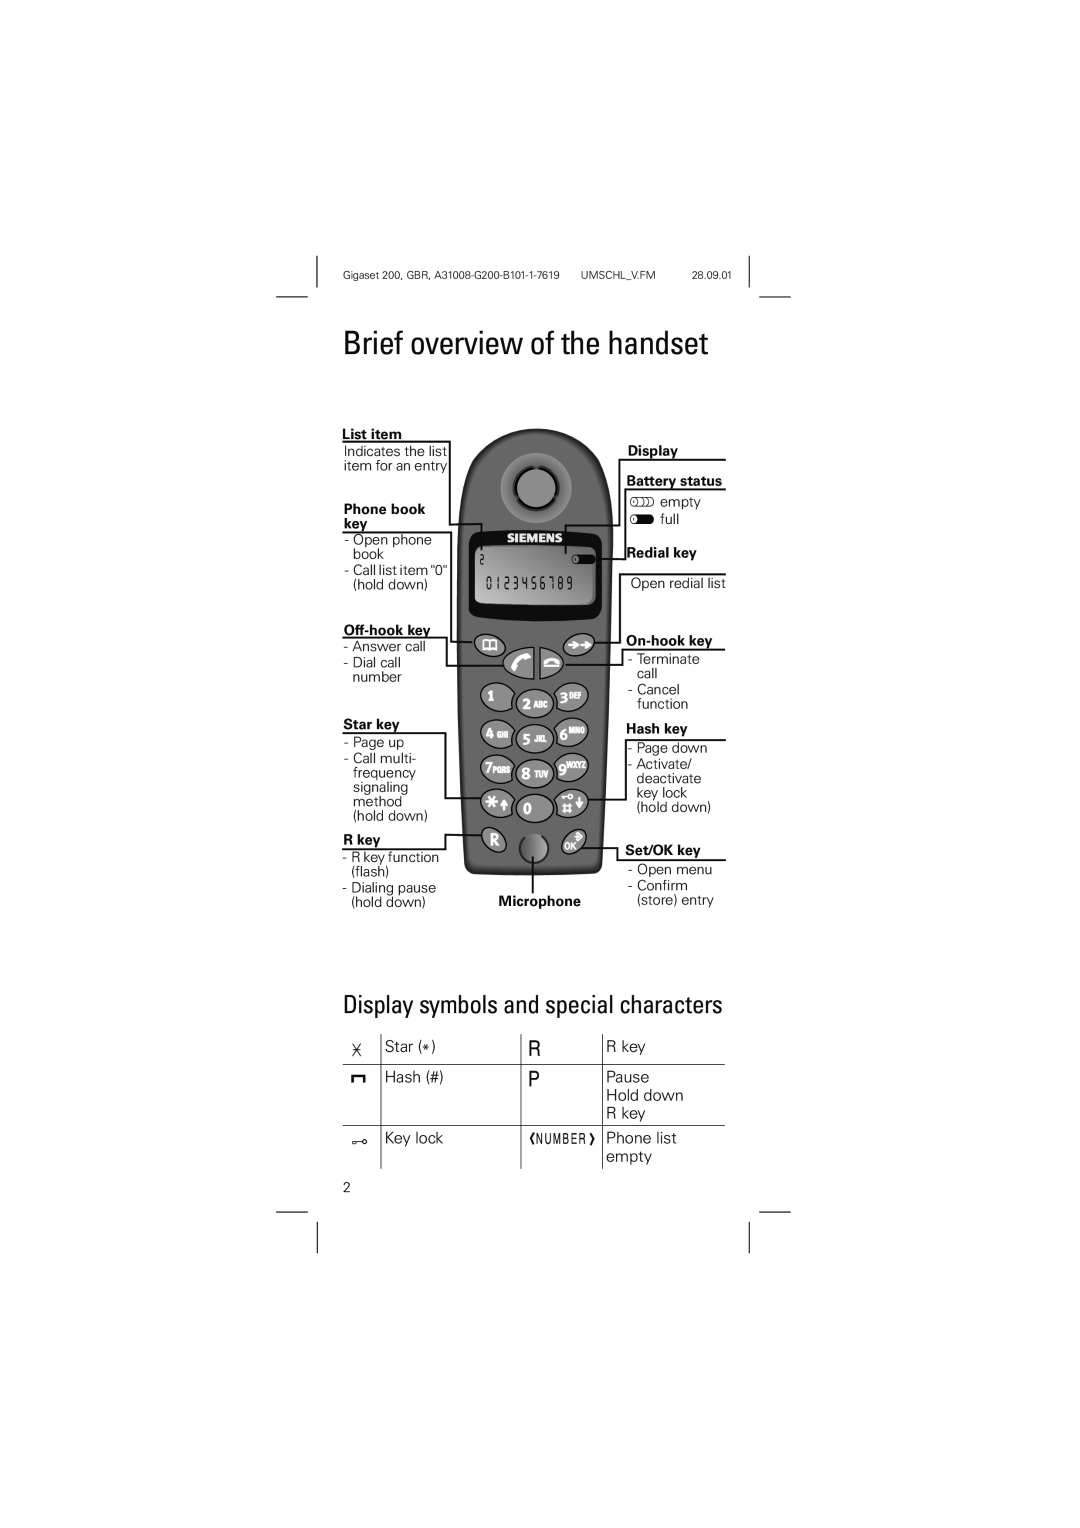 Siemens 200 manual Brief overview of the handset, Display symbols and special characters 